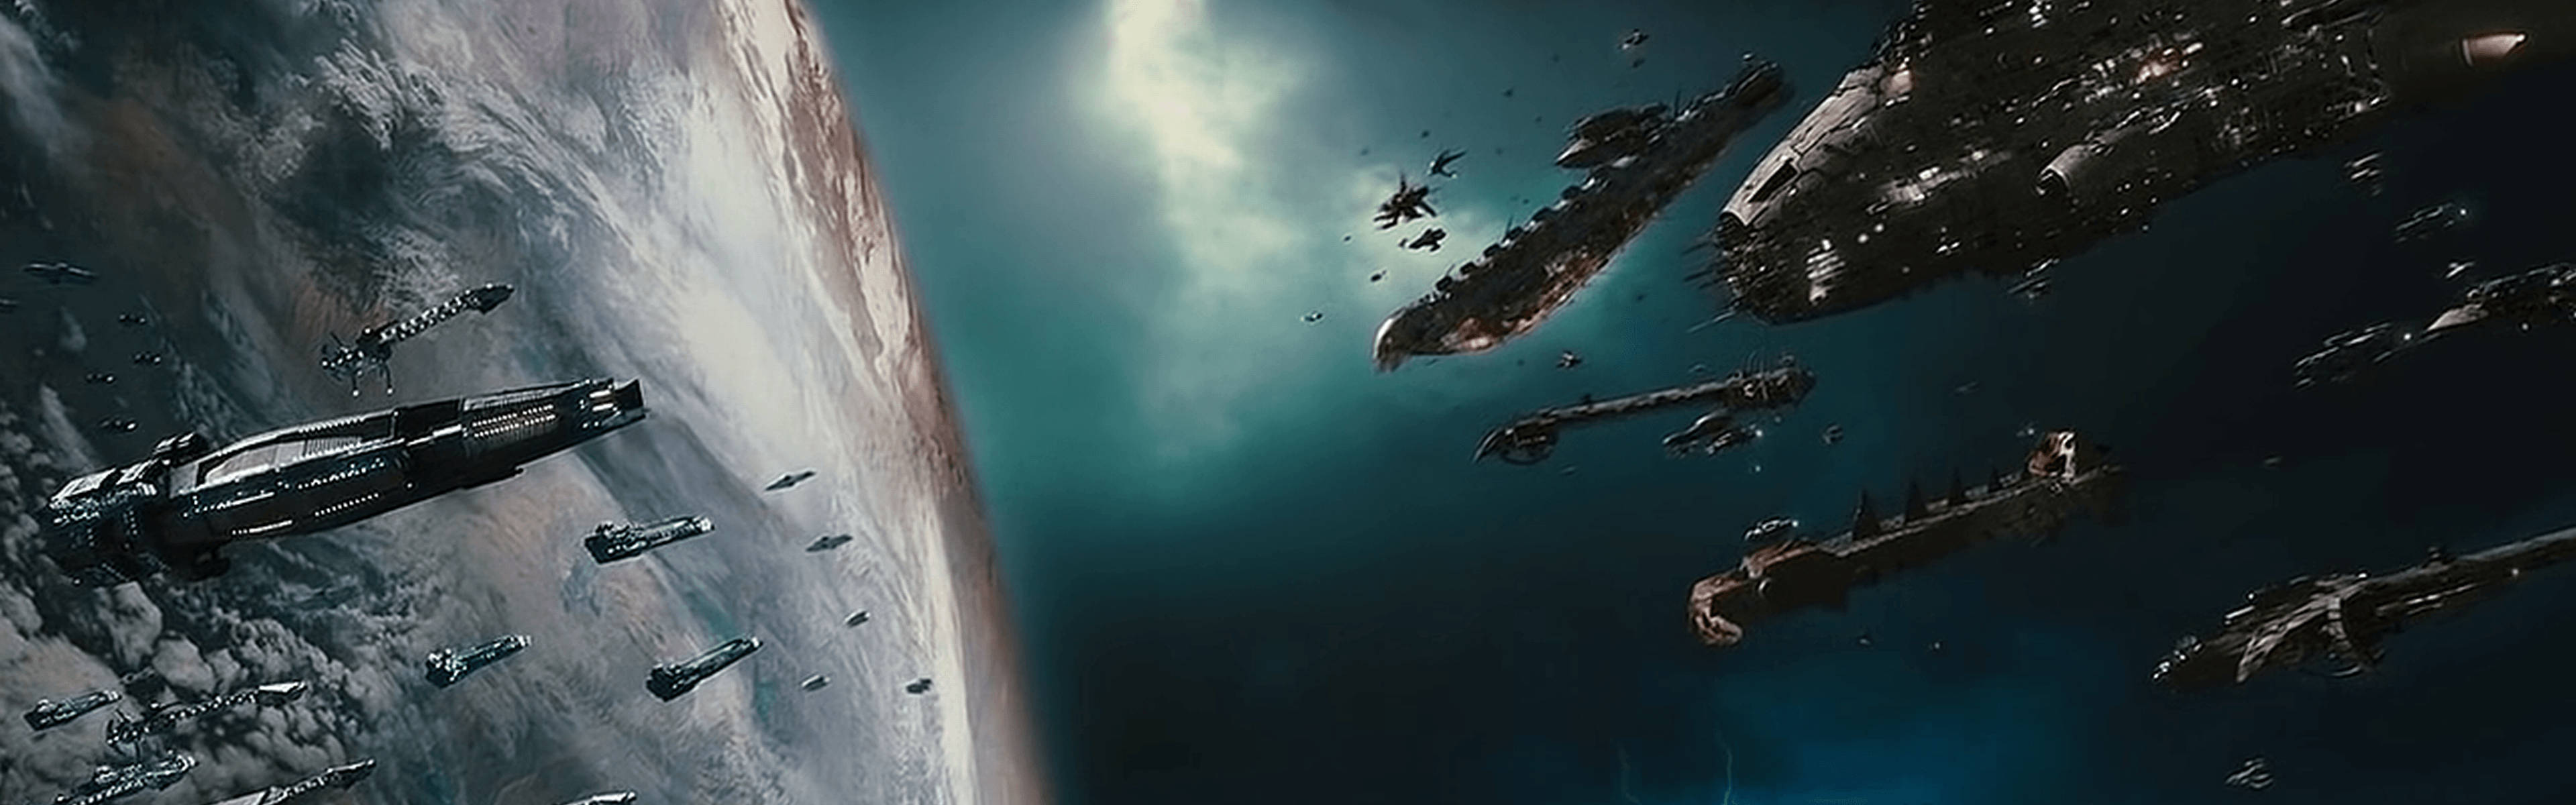 The Space Battle with Epic Visuals on Dual Monitor Displays Wallpaper